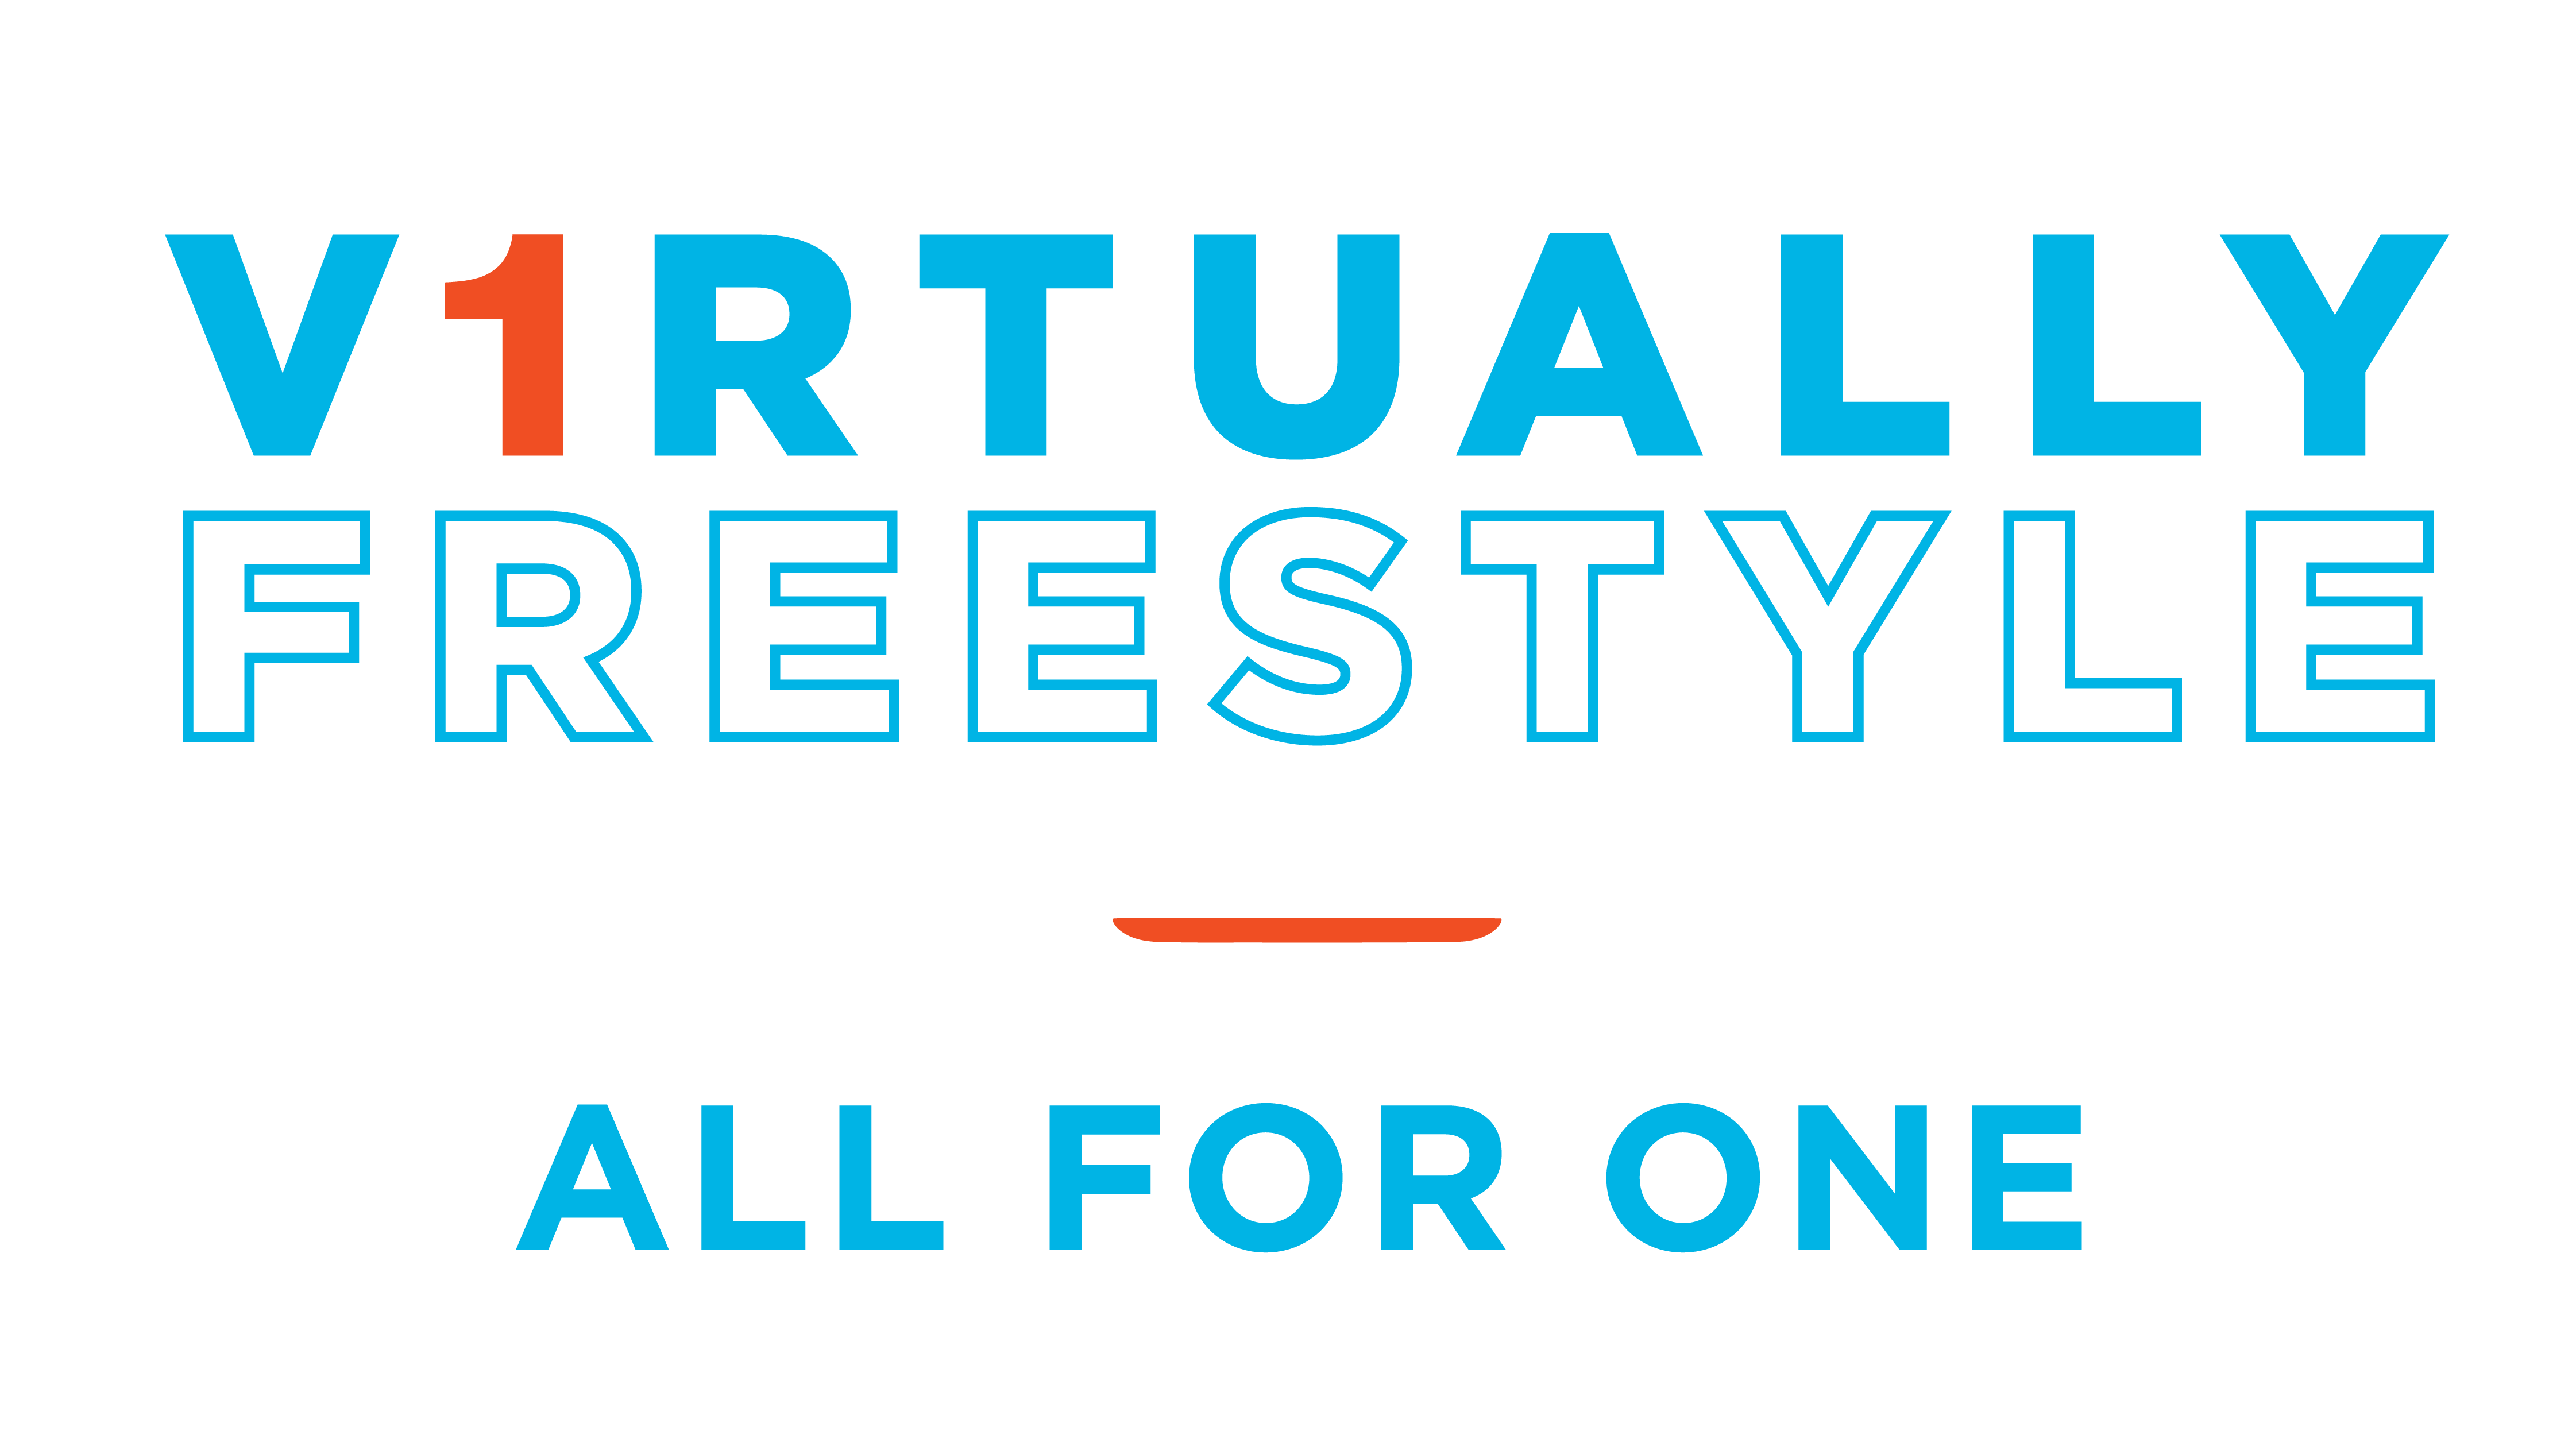 Virtually Freestyle logo - All for One